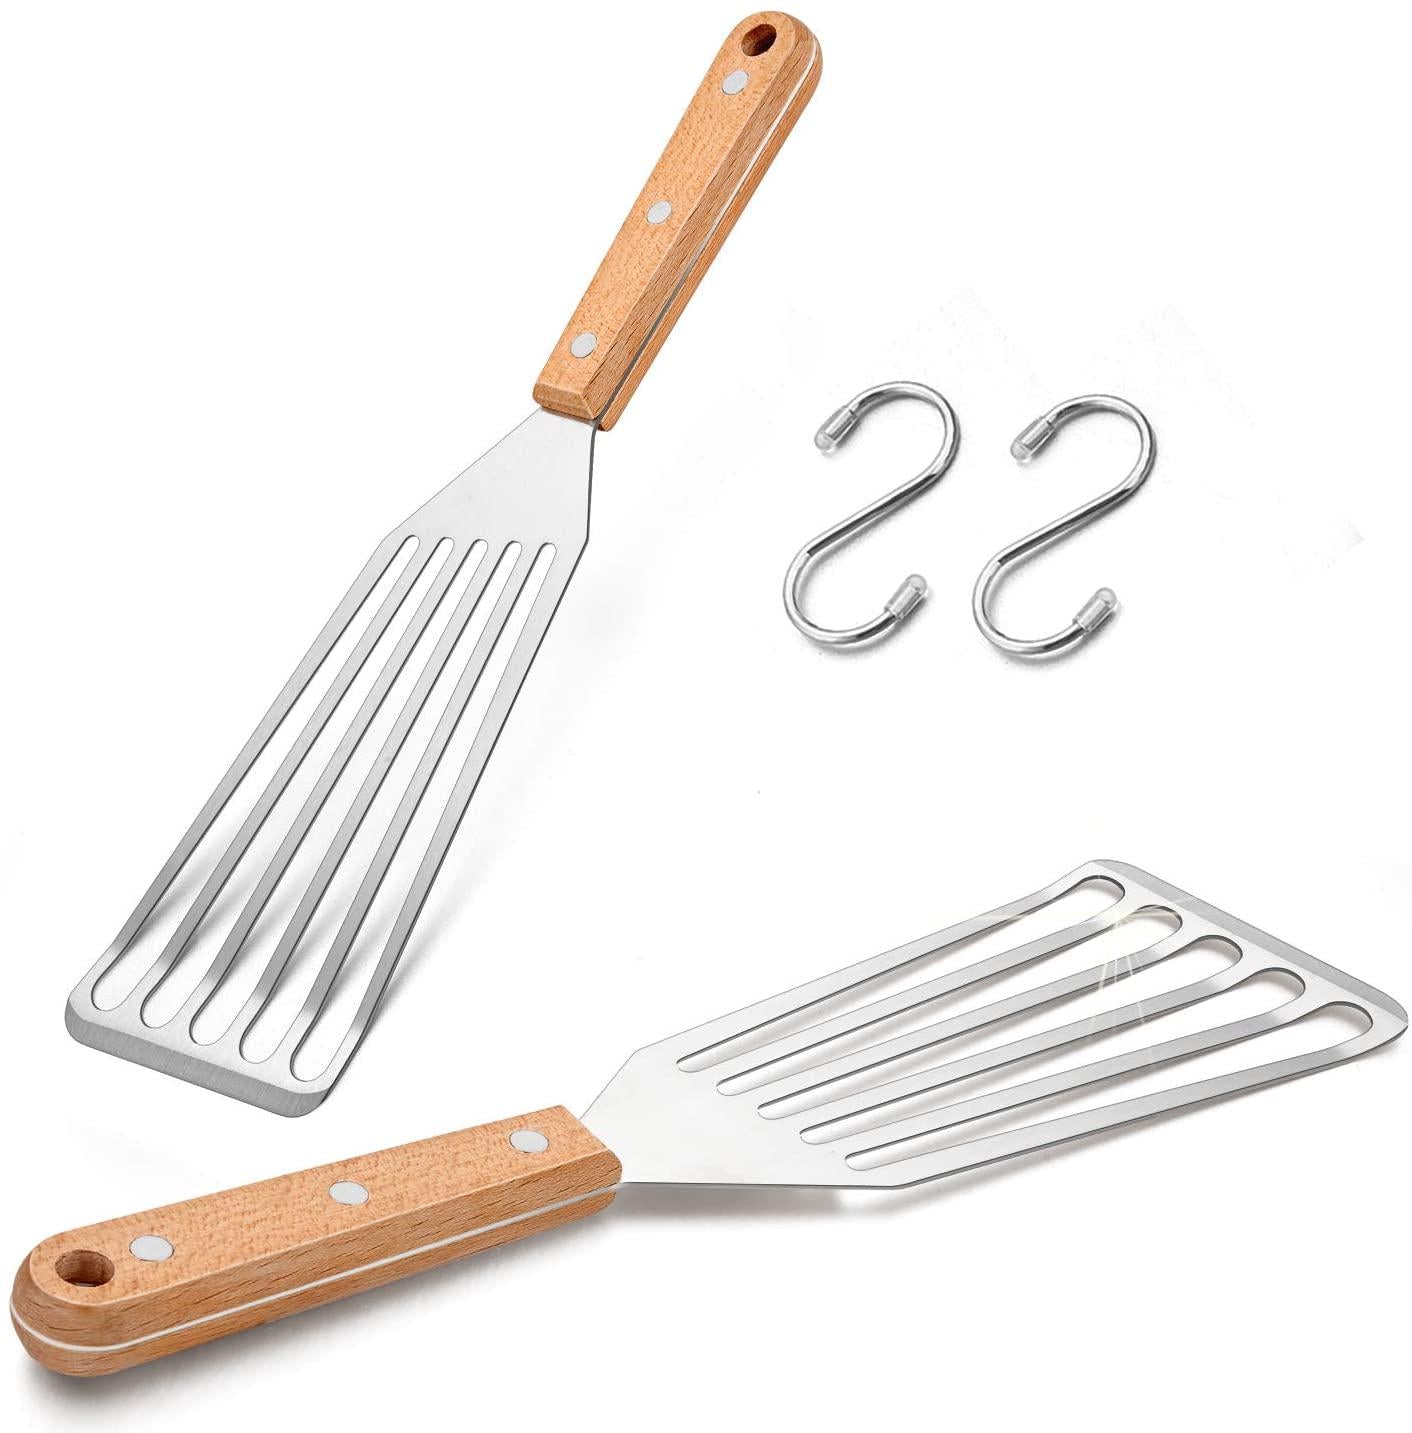 Leonyo, Fish Spatula Turner Set of 2, Leonyo Stainless Steel Slotted Fish Turner, Kitchen Metal Spatula for Flipping Frying Fish Meat Eggs Pancakes, Thin Edge and Wooden Grip, Two Size, 12.4-inch and 11-inch